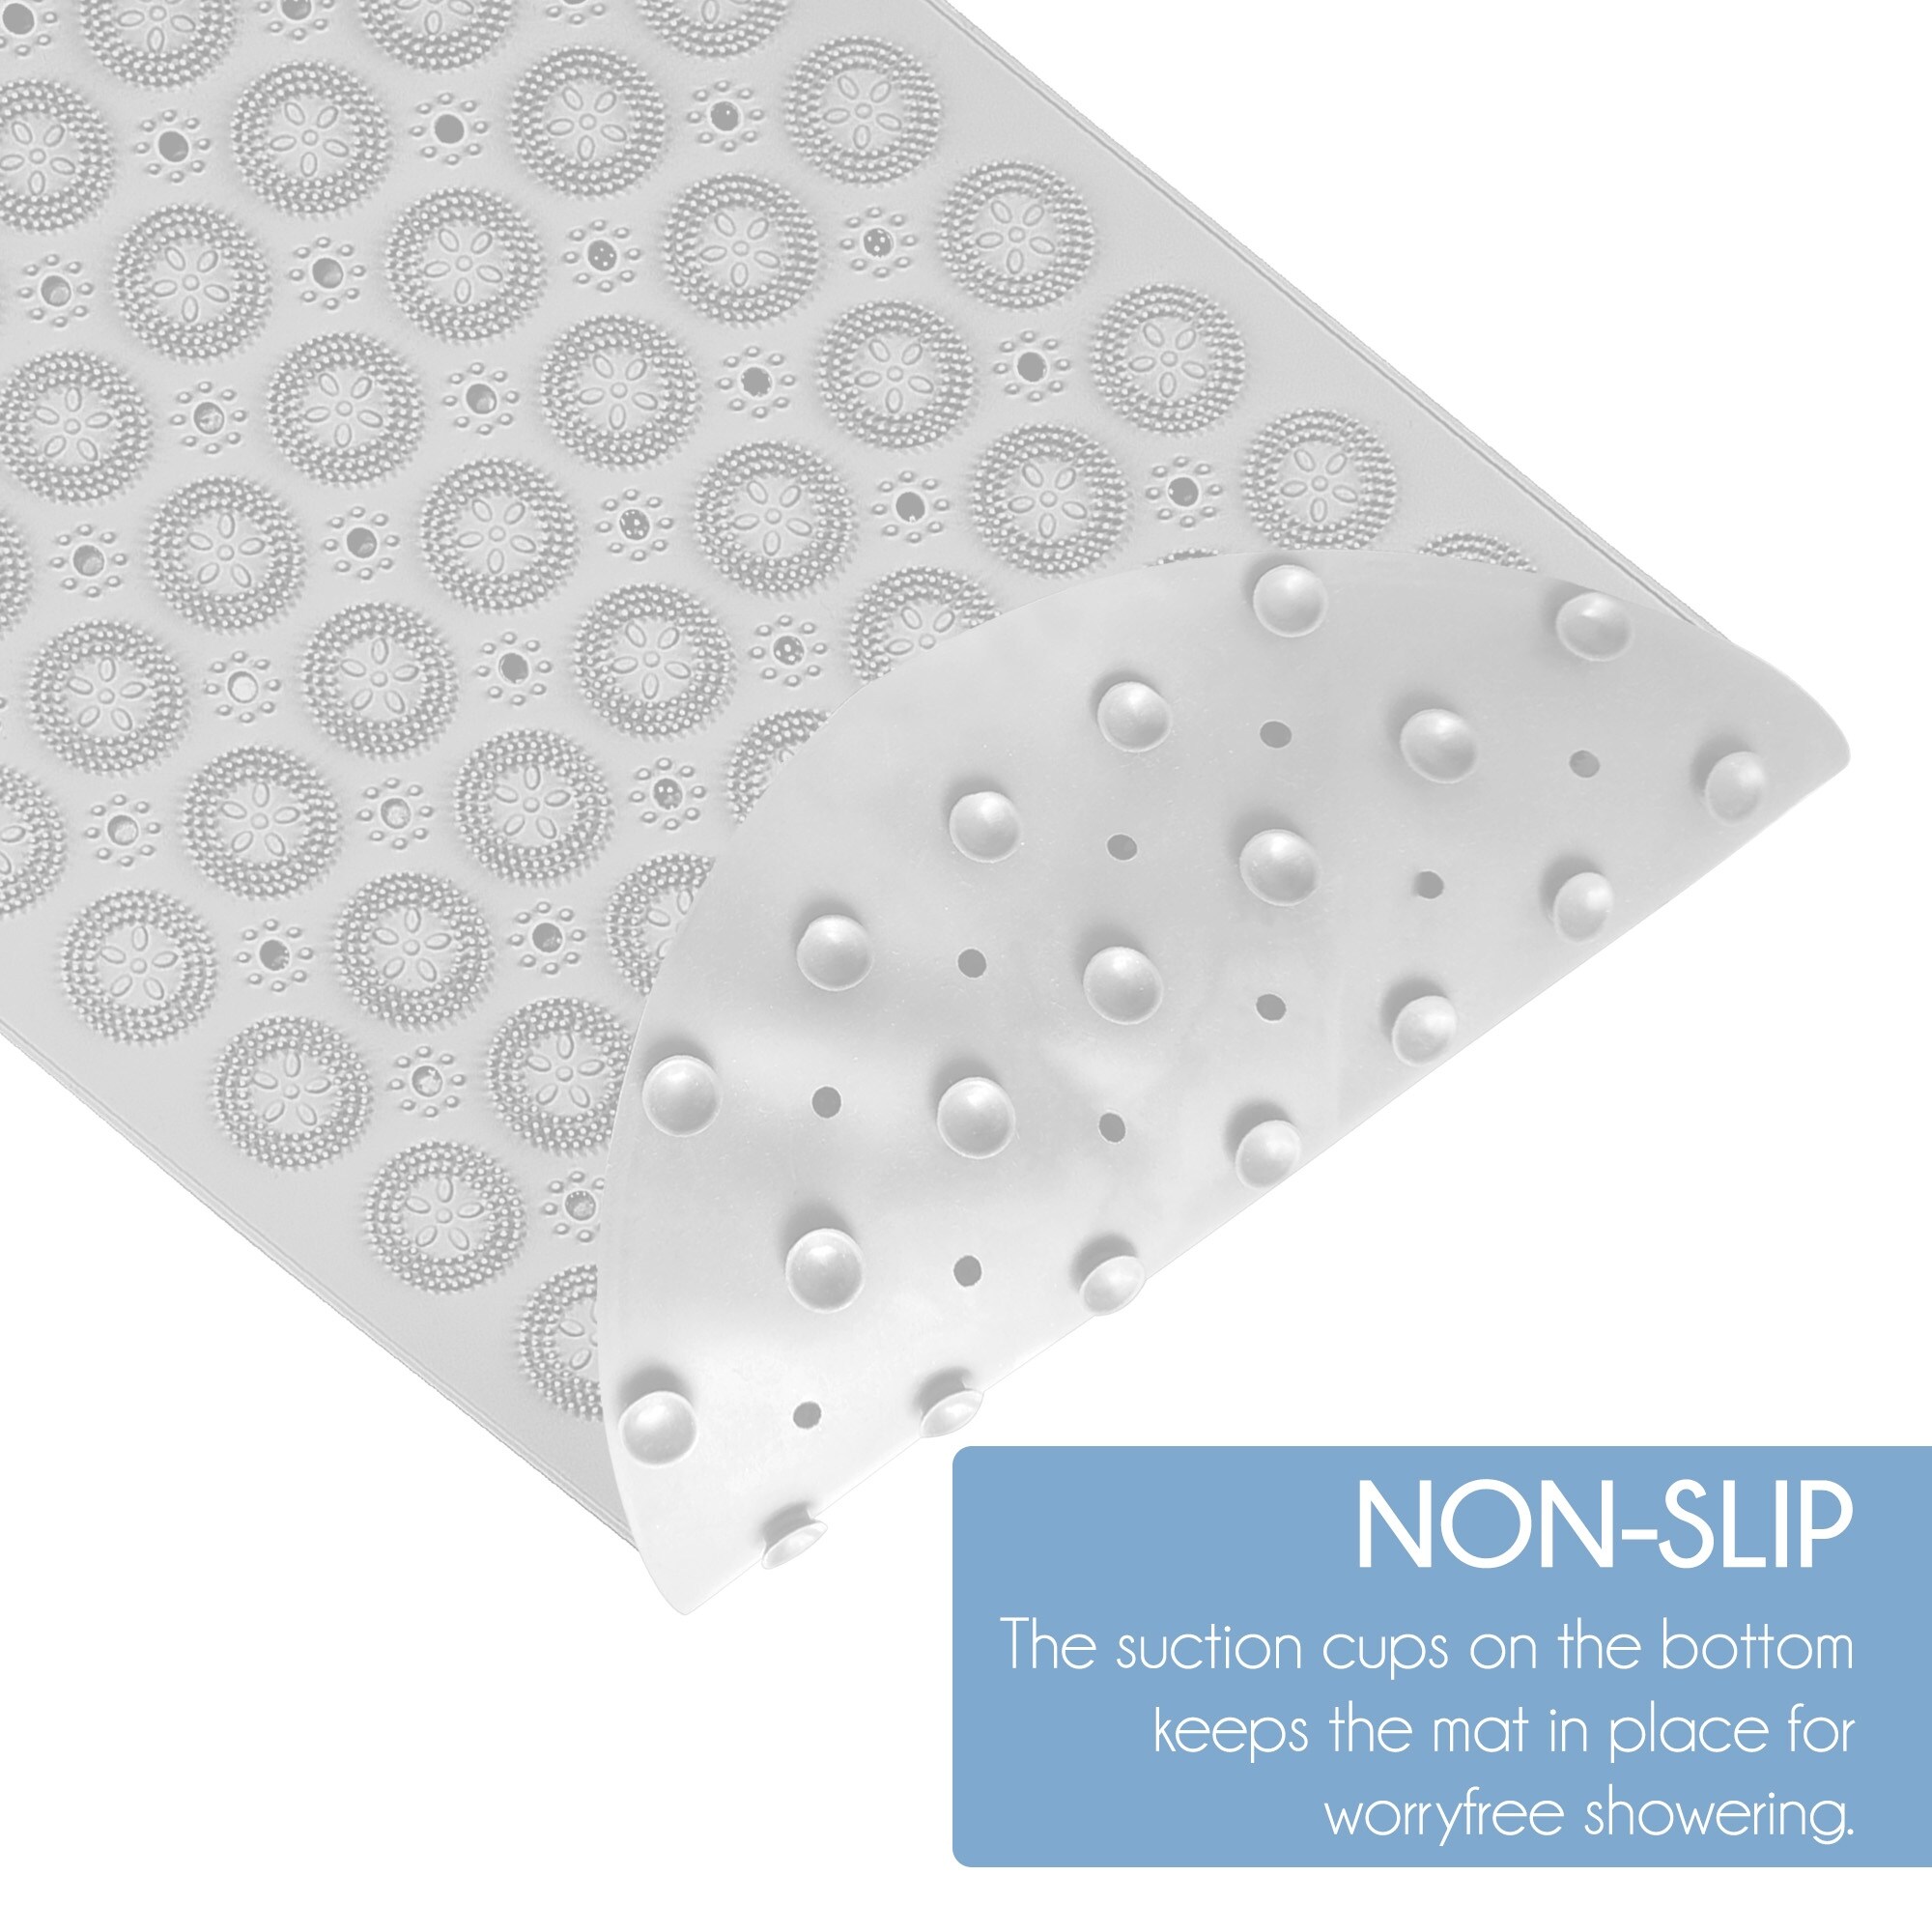 1pc Black Long Rectangle Bath Mat With Safety Non-slip Suction Cups,  Machine Washable Soft Pvc Material With Drainage Holes, Suitable For Shower/ bath/tub